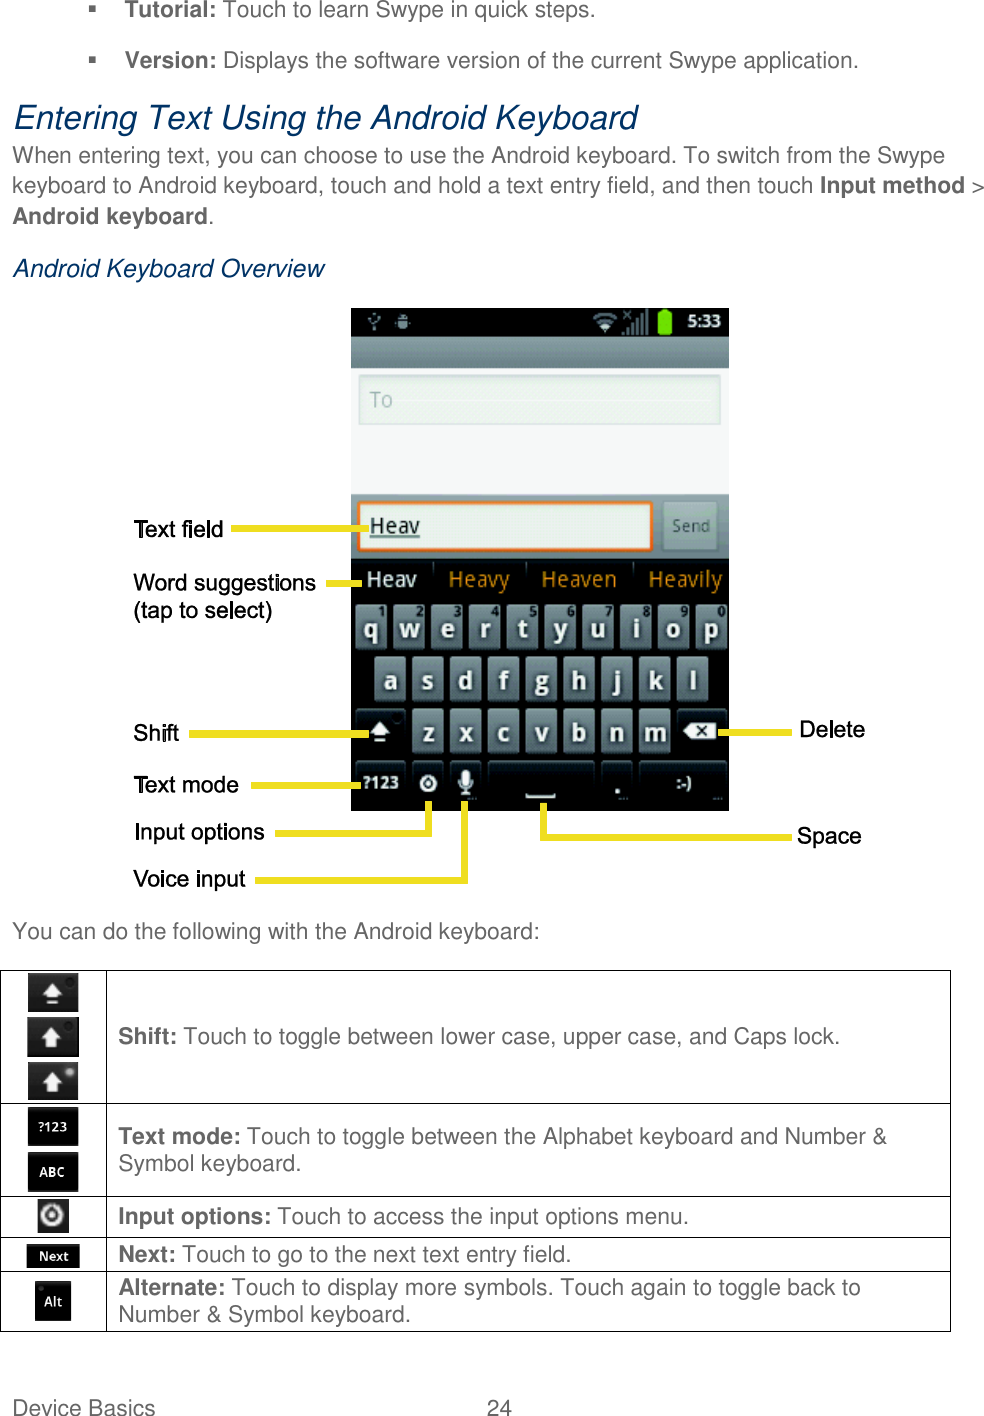 Device Basics  24    Tutorial: Touch to learn Swype in quick steps.  Version: Displays the software version of the current Swype application. Entering Text Using the Android Keyboard When entering text, you can choose to use the Android keyboard. To switch from the Swype keyboard to Android keyboard, touch and hold a text entry field, and then touch Input method &gt; Android keyboard. Android Keyboard Overview  You can do the following with the Android keyboard:    Shift: Touch to toggle between lower case, upper case, and Caps lock.   Text mode: Touch to toggle between the Alphabet keyboard and Number &amp; Symbol keyboard.  Input options: Touch to access the input options menu.  Next: Touch to go to the next text entry field.  Alternate: Touch to display more symbols. Touch again to toggle back to Number &amp; Symbol keyboard.  